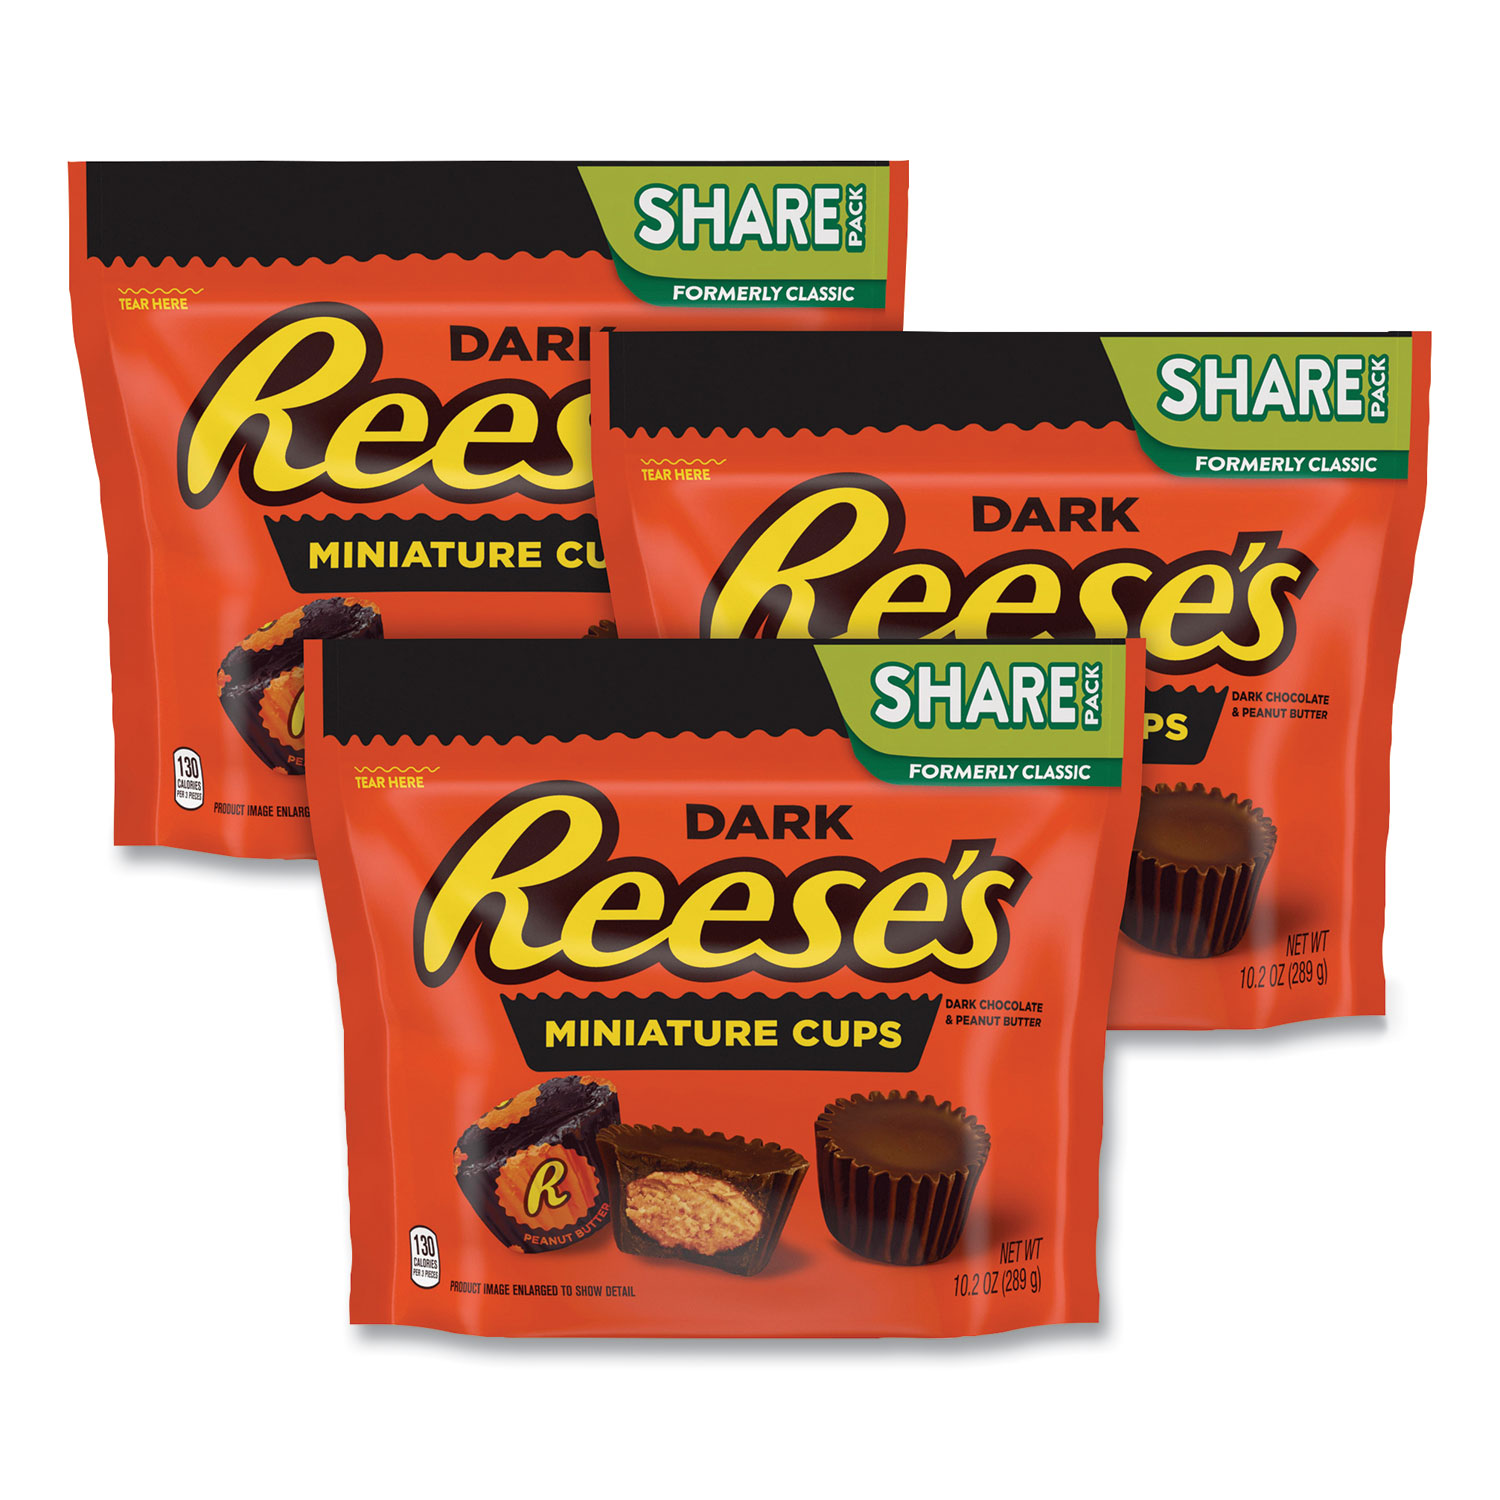  Reese's 43228 Peanut Butter Cups Miniatures Share Pack, Dark Chocolate, 10.2 oz Bag, 3 Bags/Pack, Free Delivery in 1-4 Business Days (GRR24600440) 